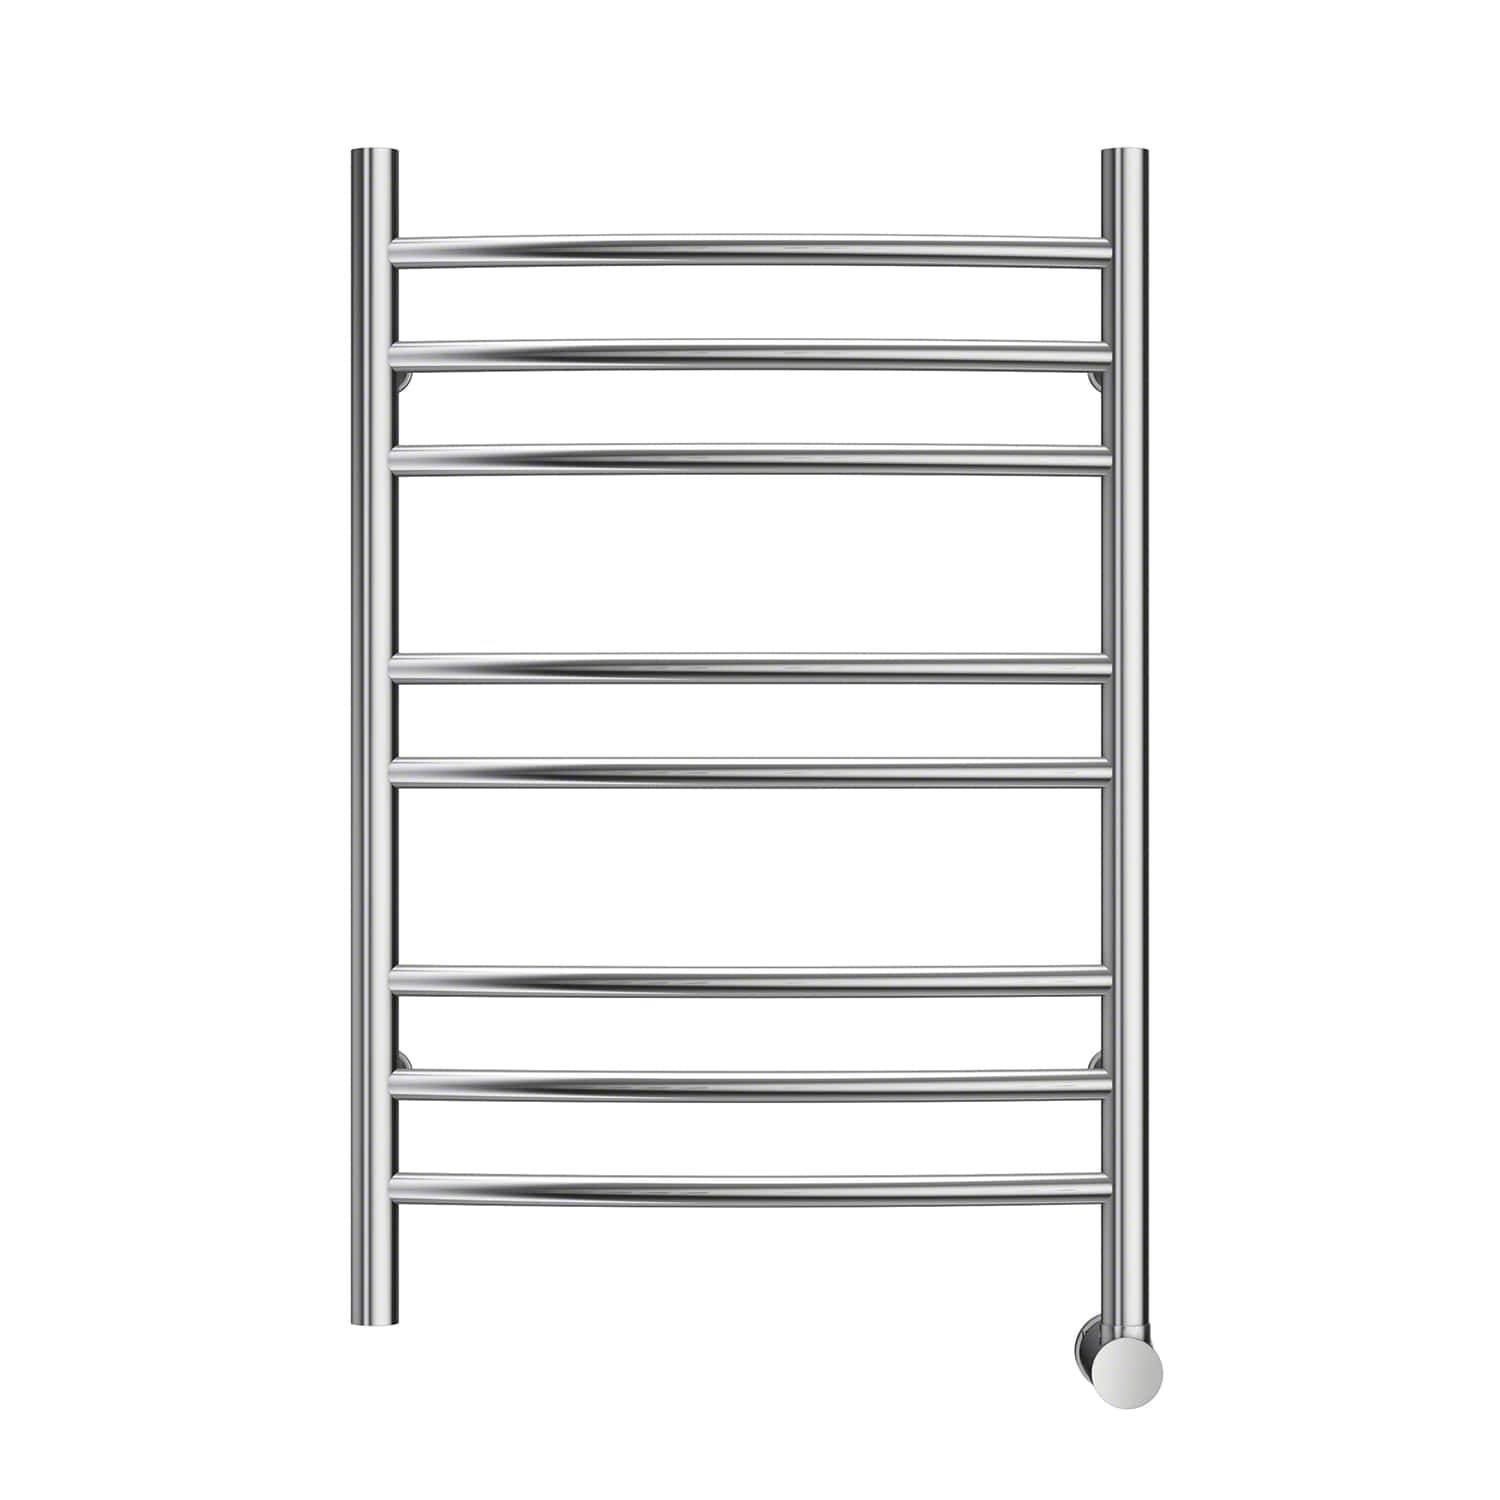 Mr. Steam Metro Collection® 8-Bar Wall-Mounted Electric Towel Warmer with Digital Timer in Stainless Steel Polished